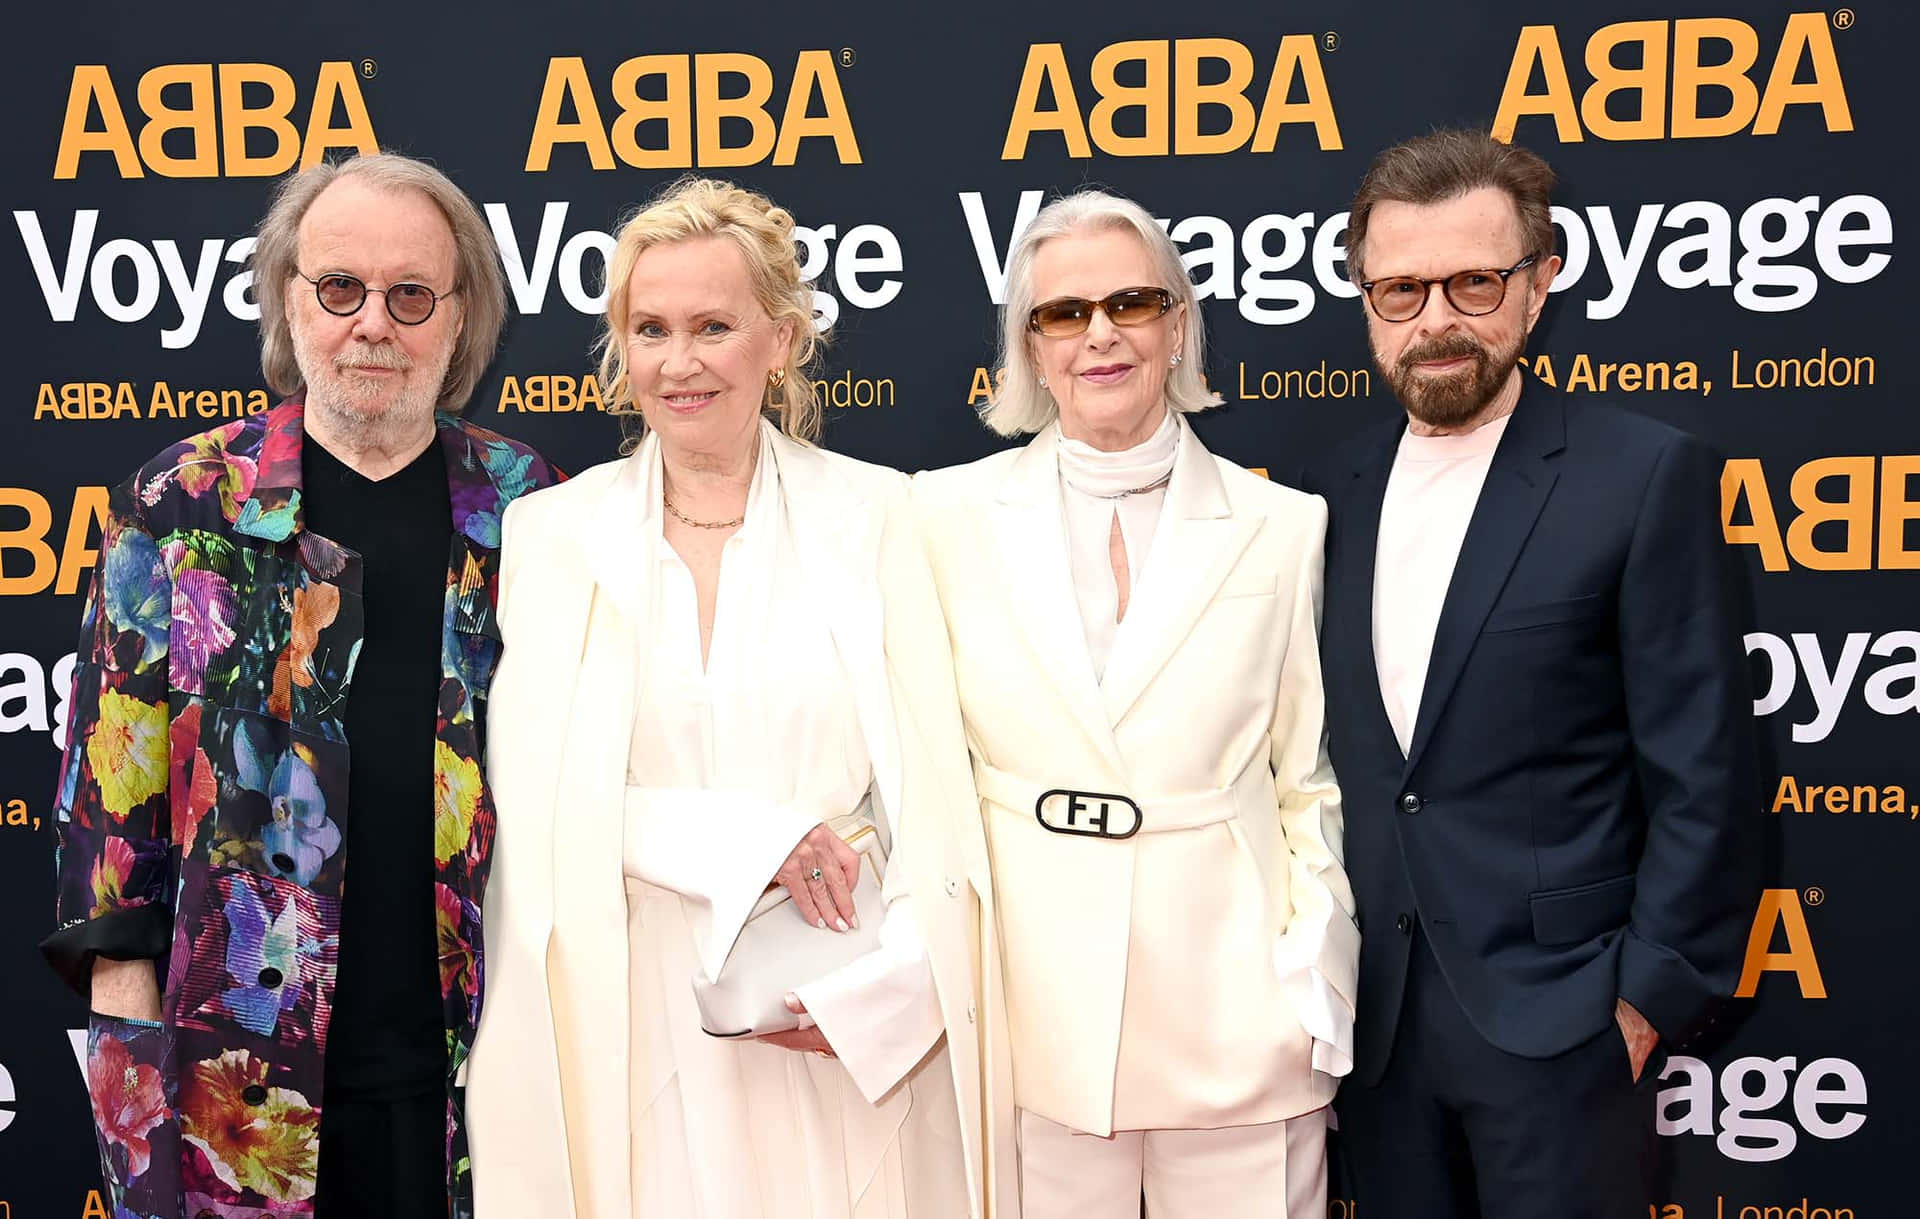 ABBA, Capturing the World's Attention with Their Unique Sound